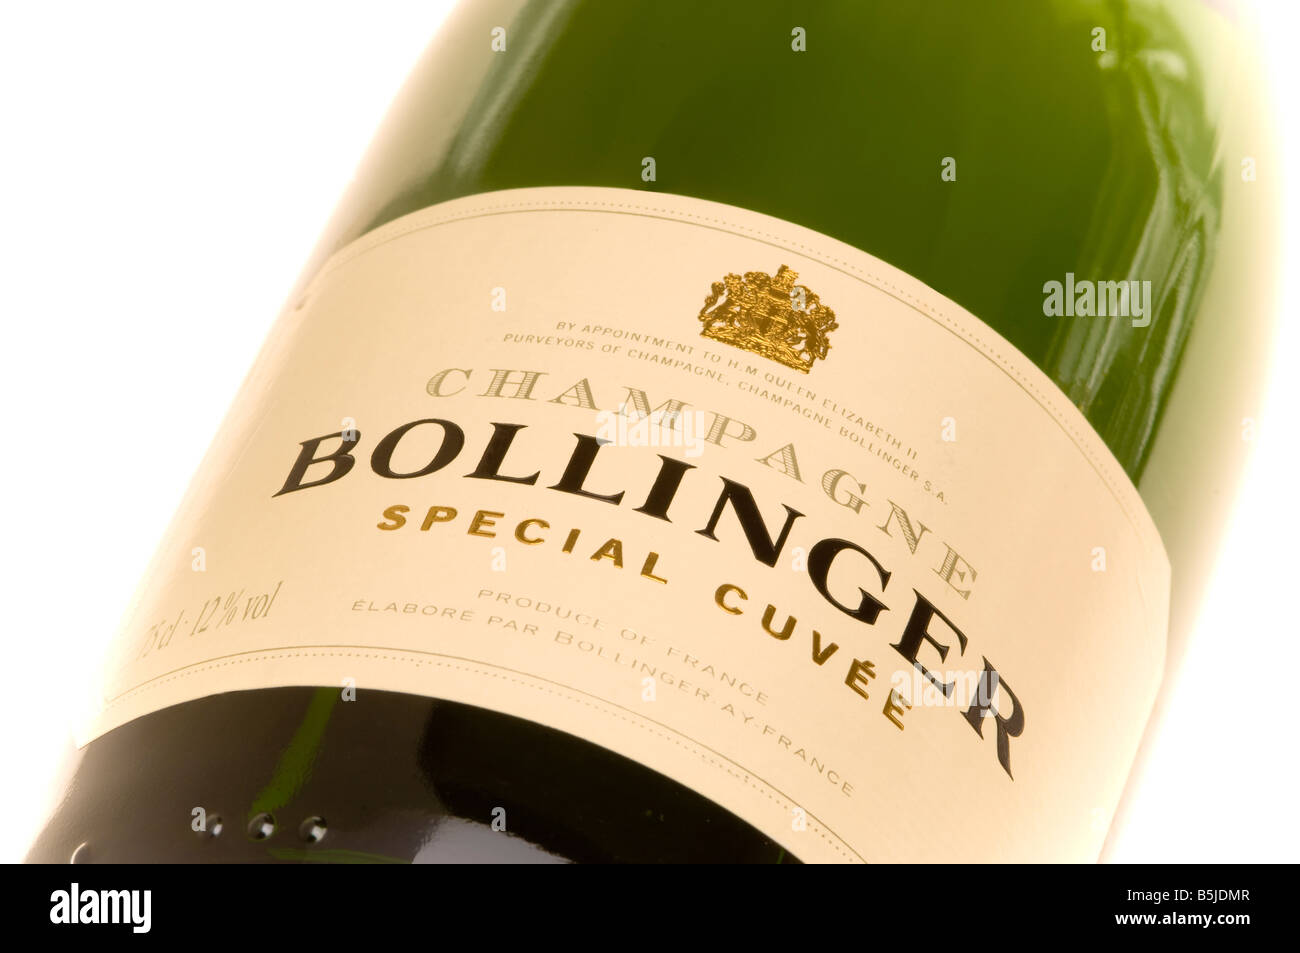 Closeup of the label on a bottle of Bollinger Champagne, seen against a white background. Stock Photo